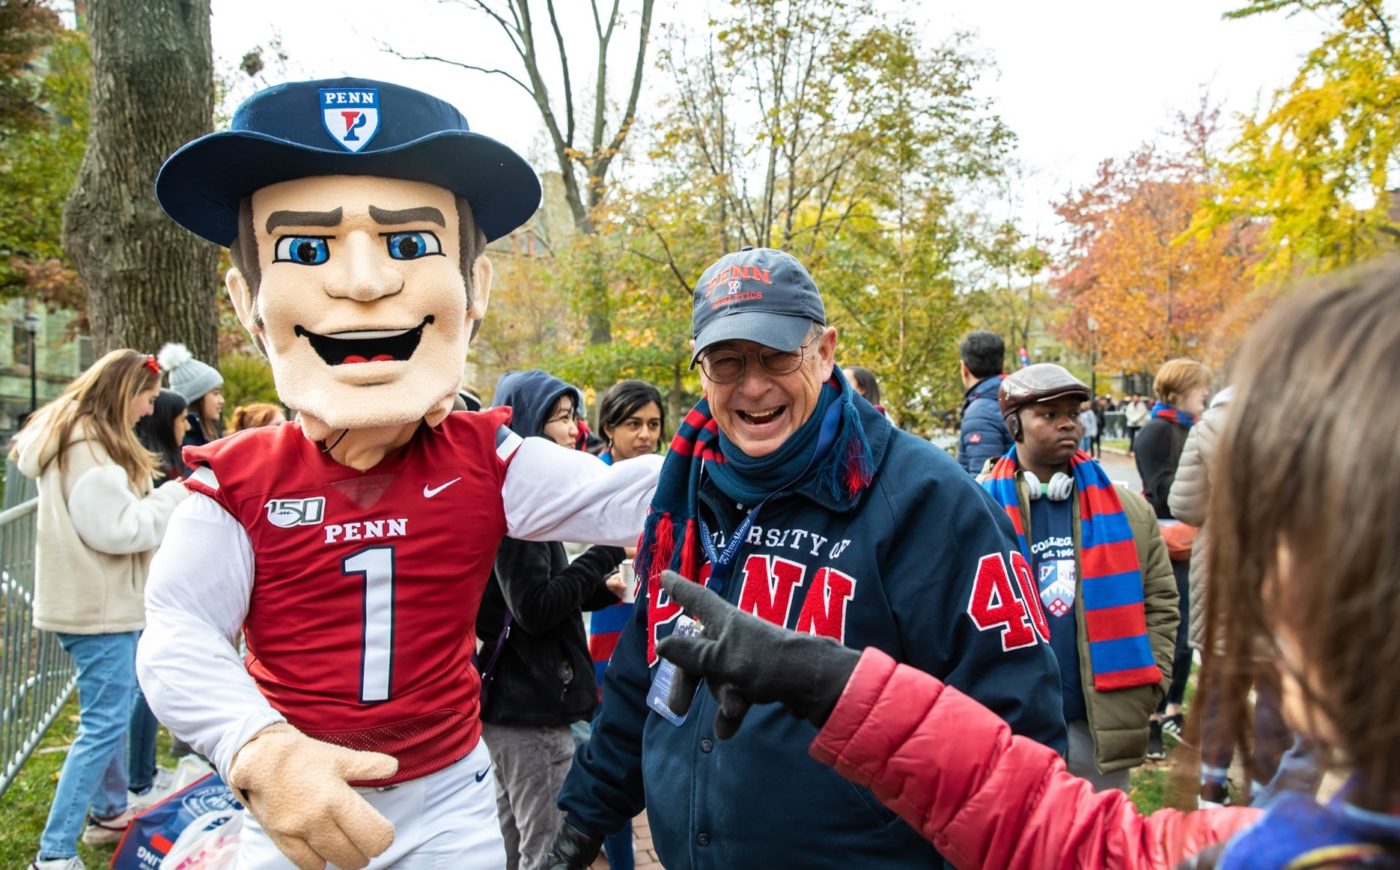 Man with Mascot at Quaker Fest during Homecoming Weekend